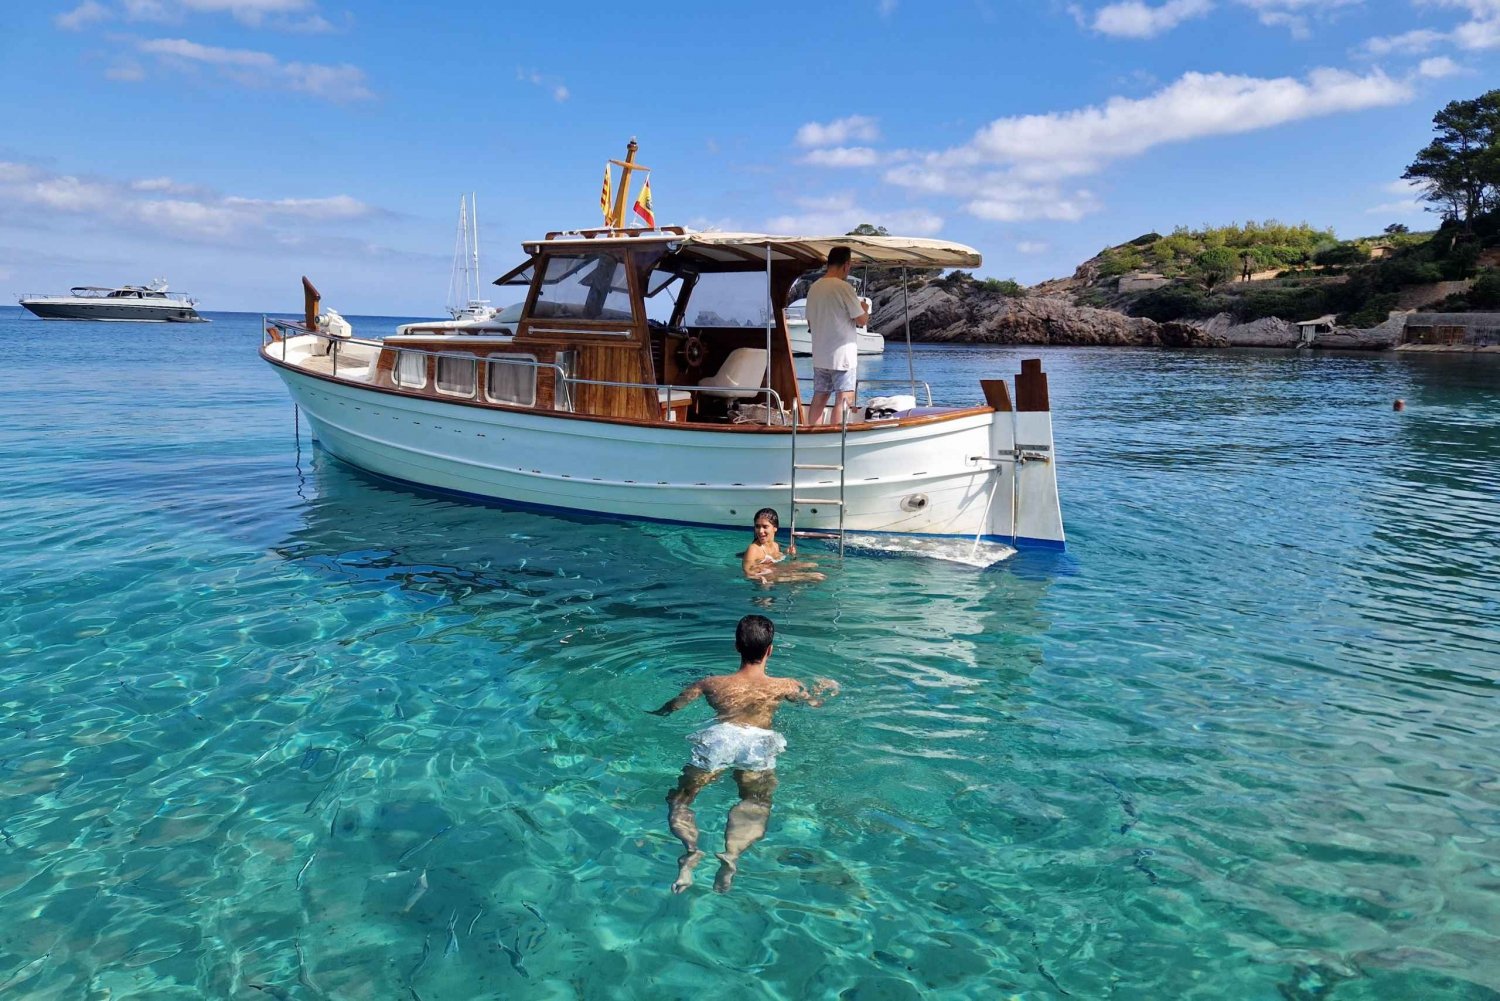 Ibiza: One day excursion on a traditional Ibiza boat (Monday)